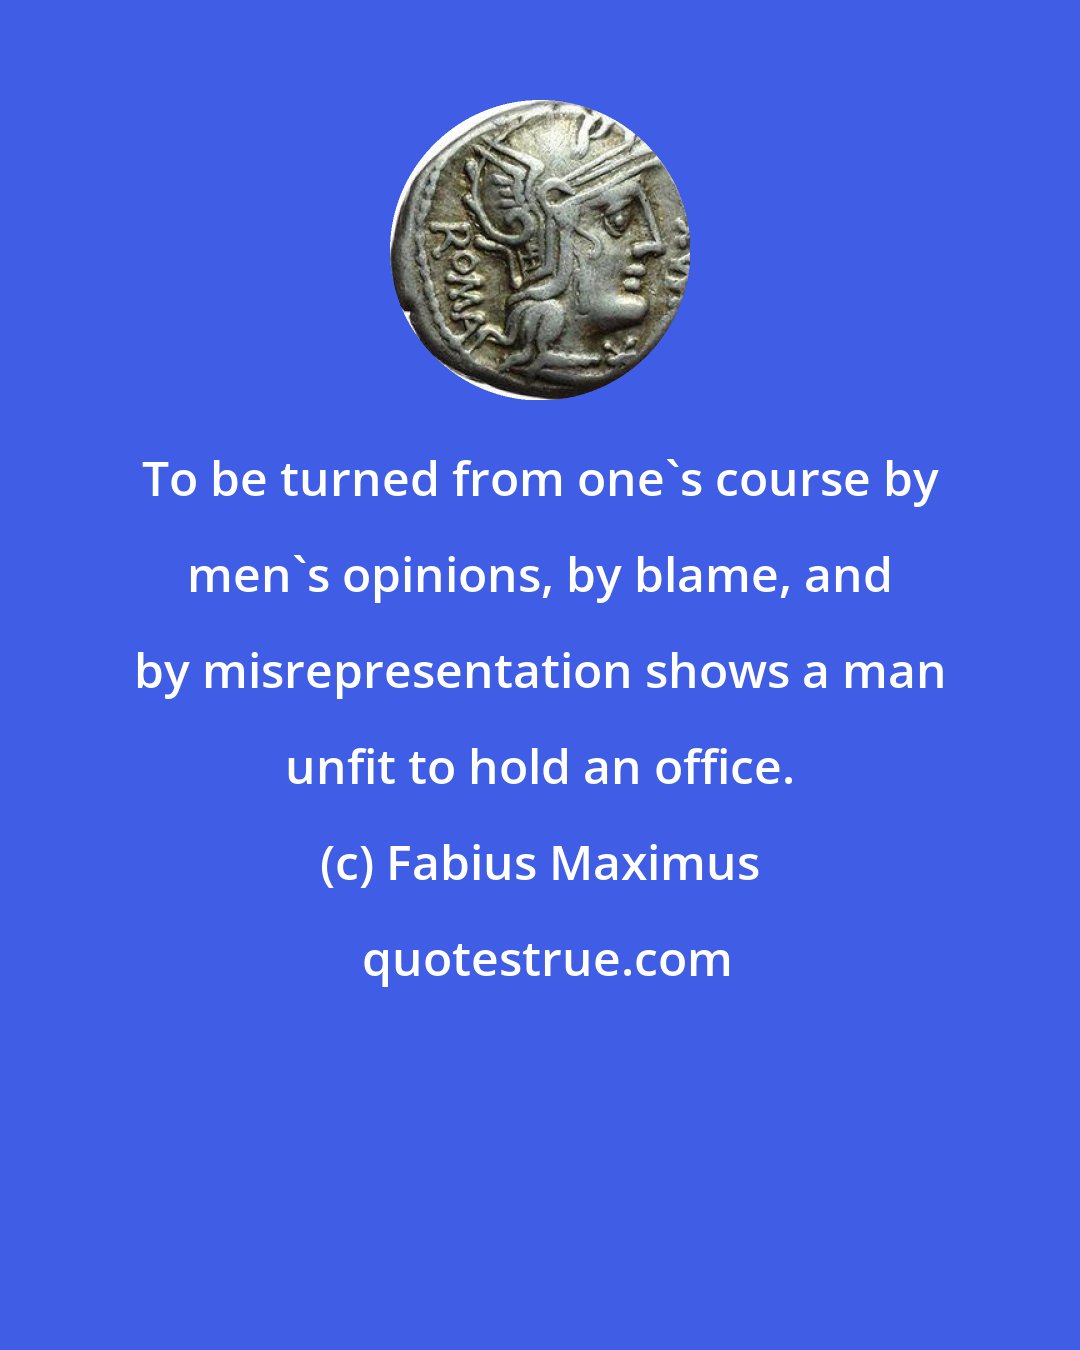 Fabius Maximus: To be turned from one's course by men's opinions, by blame, and by misrepresentation shows a man unfit to hold an office.